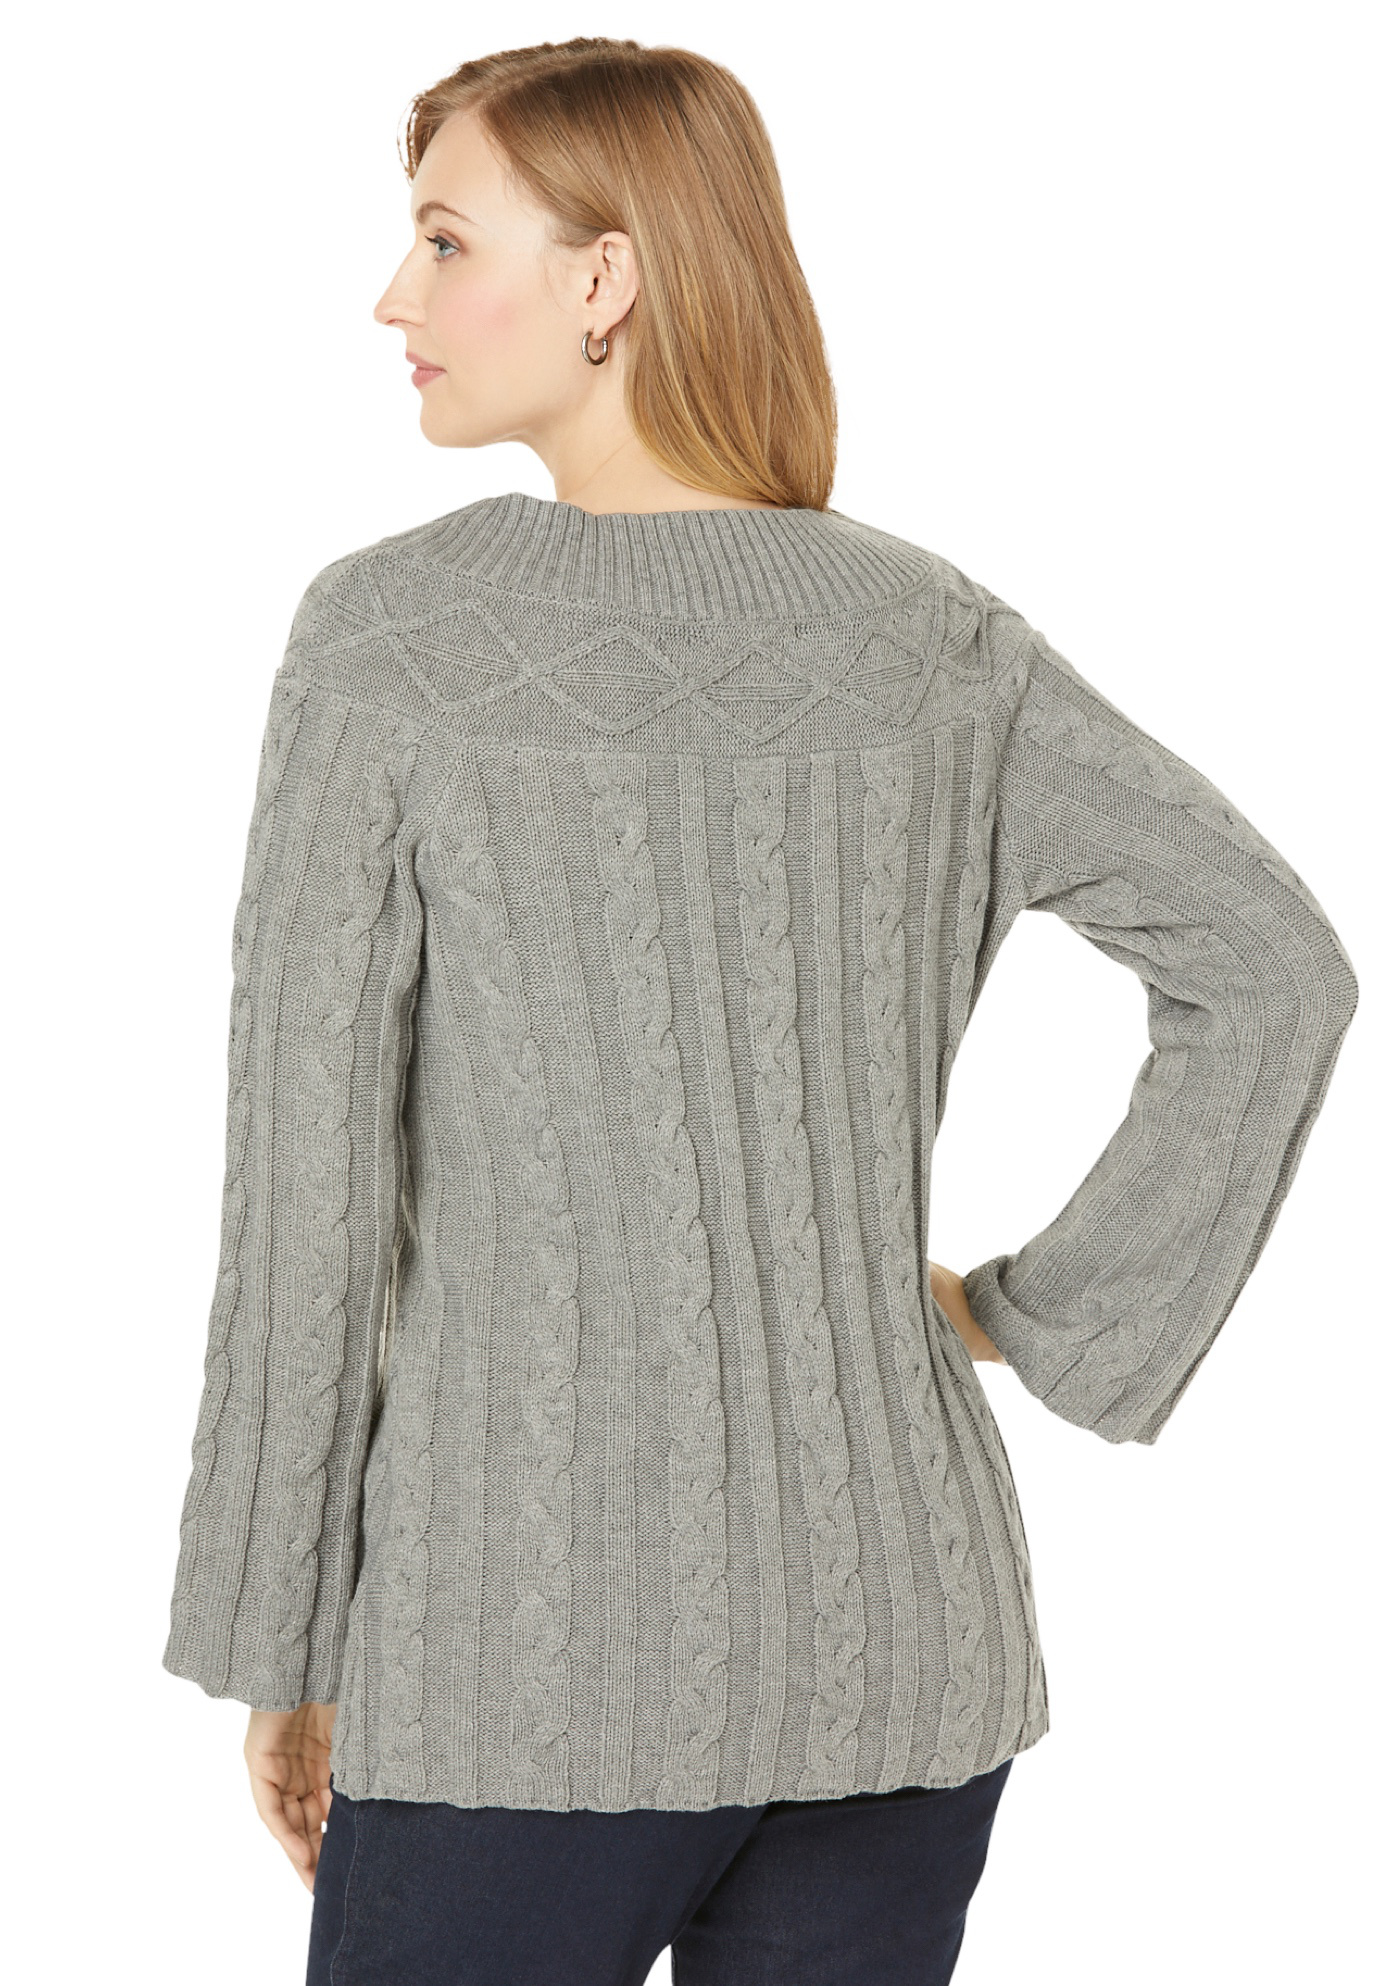 Jessica London Women's Plus Size Cable Sweater Tunic Sweater - image 3 of 4